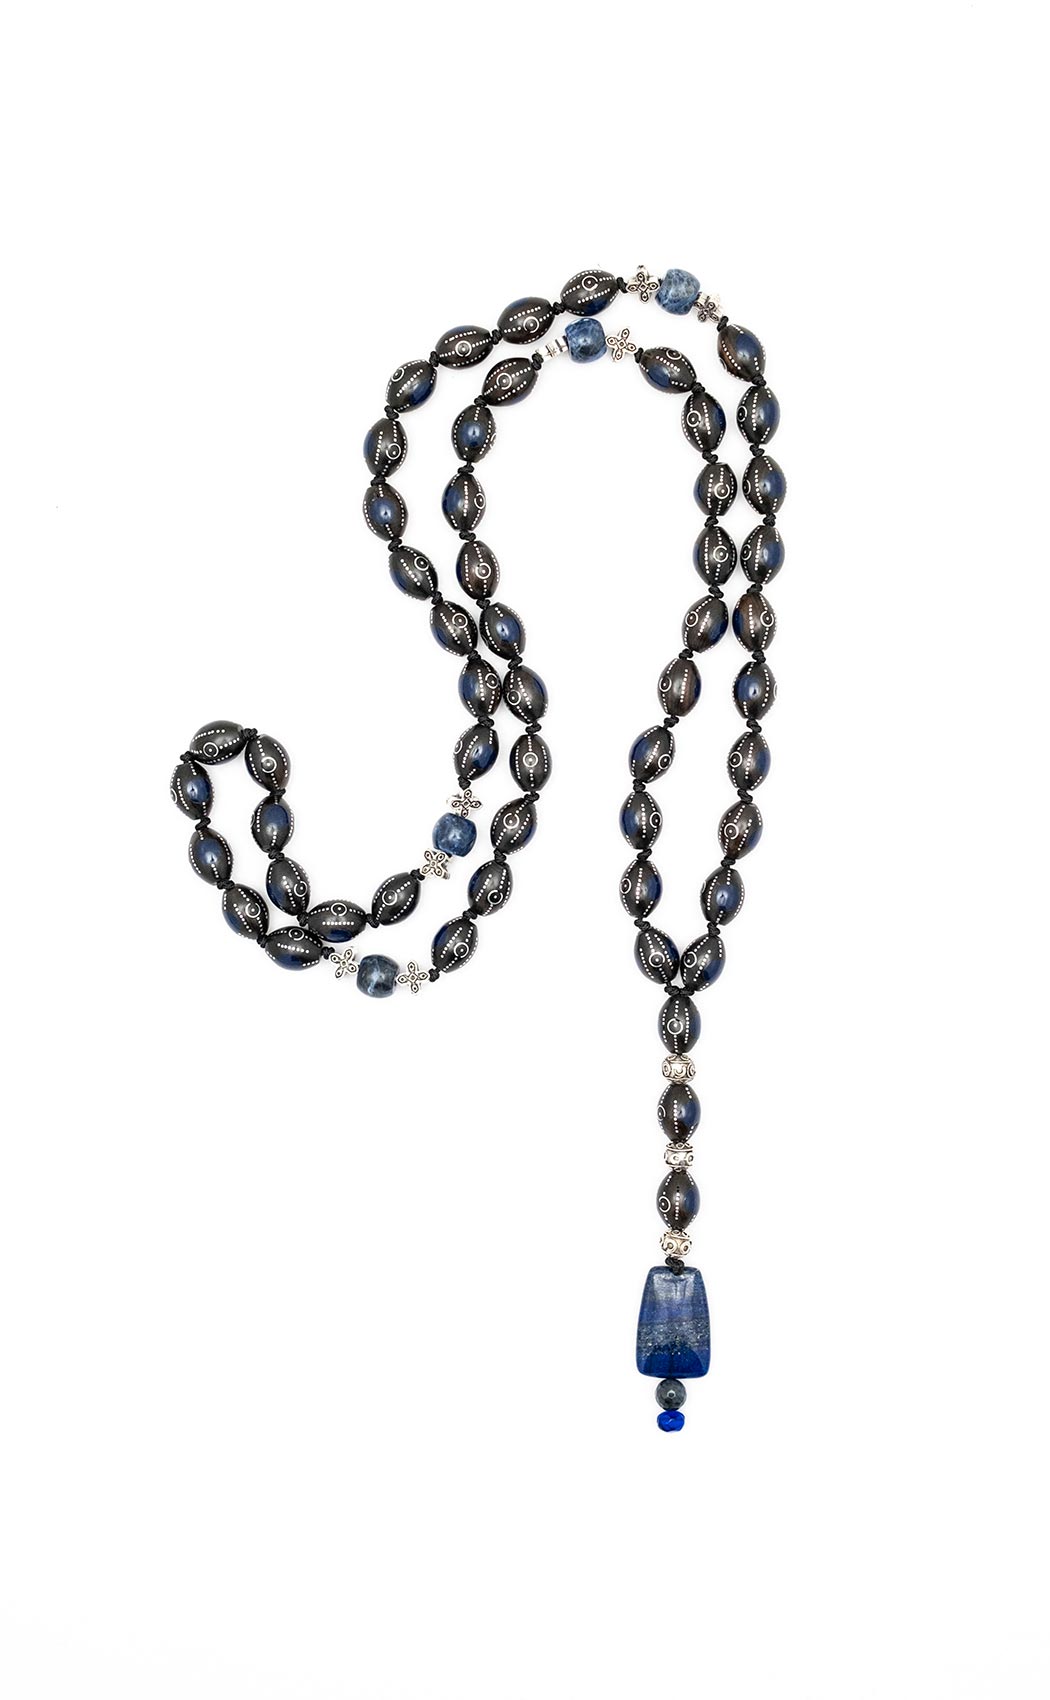 Catholic Prayer Beads (Rozary) from ebony with inlaid enamel and silver, Agates and Tin